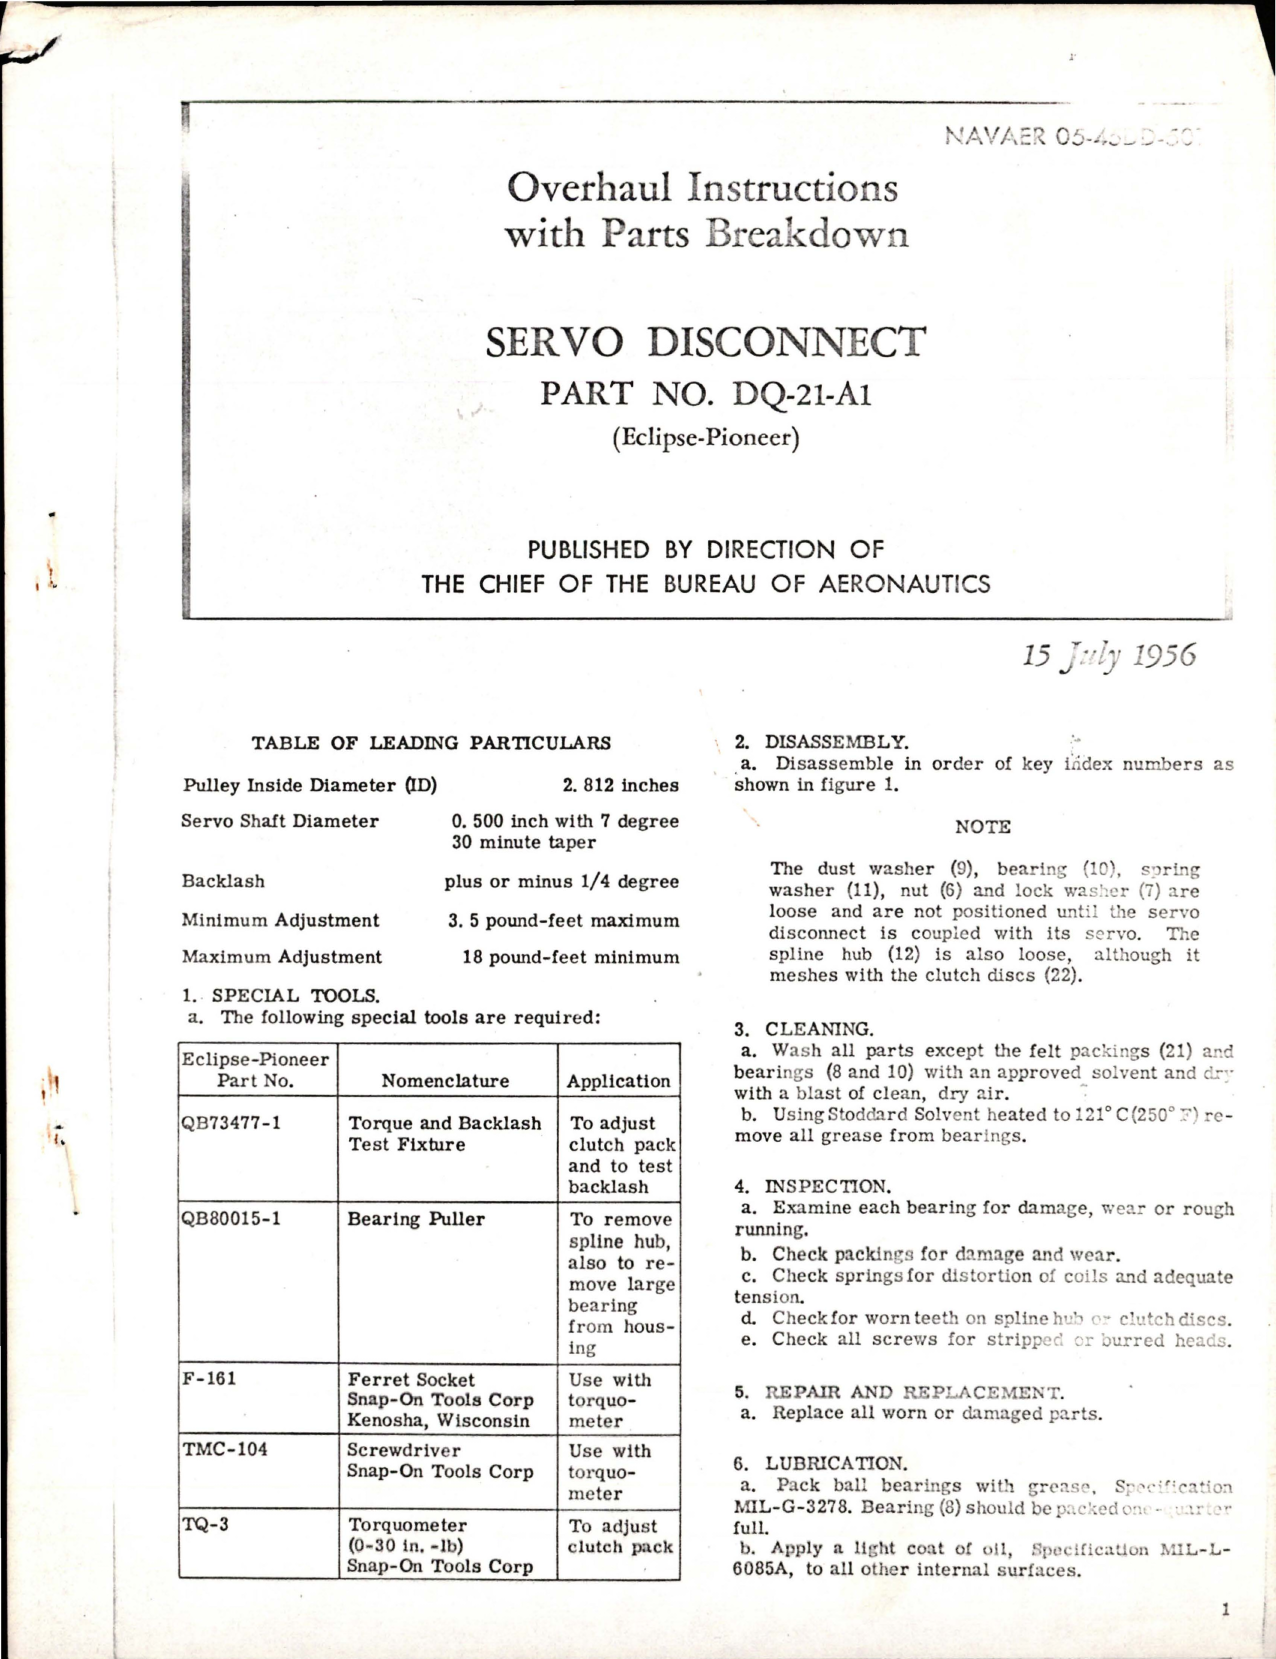 Sample page 1 from AirCorps Library document: Overhaul Instructions with Parts for Servo Disconnect - Part DQ-21-A1